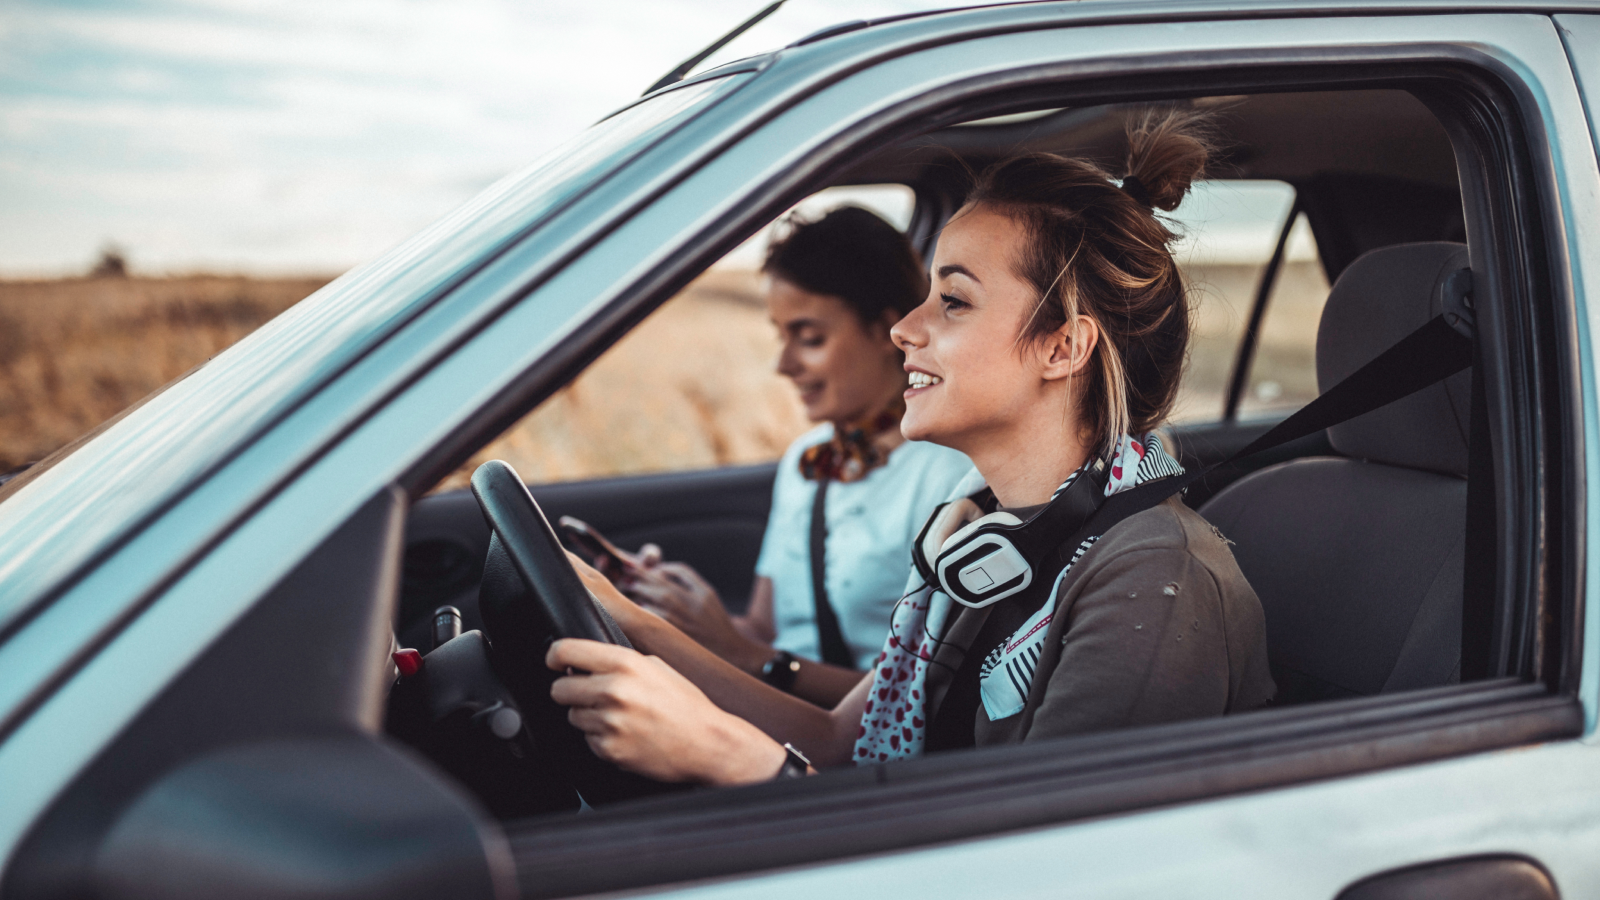 Safety Tips for Teenage Drivers